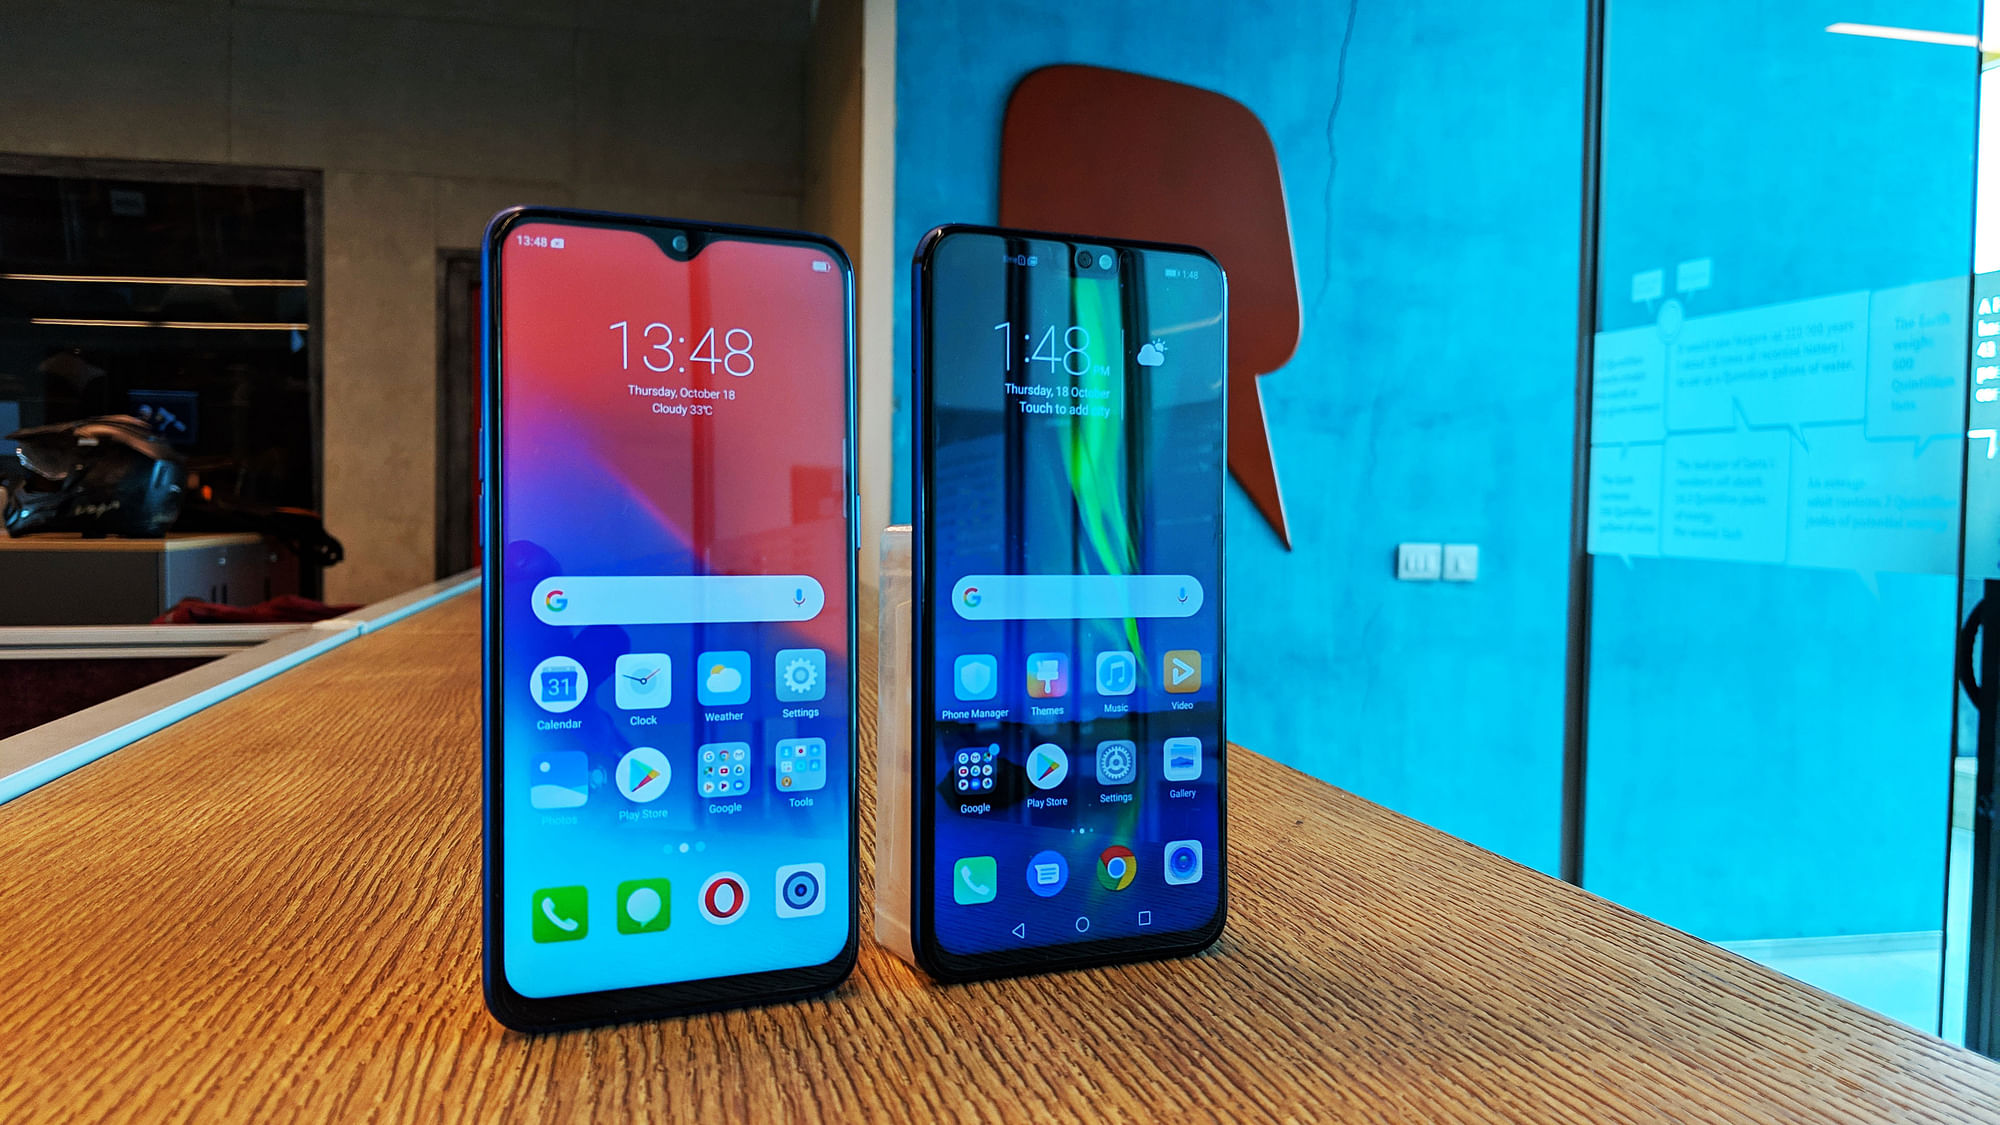 The Realme 2 Pro&nbsp; (left) and Honor 8x (right)